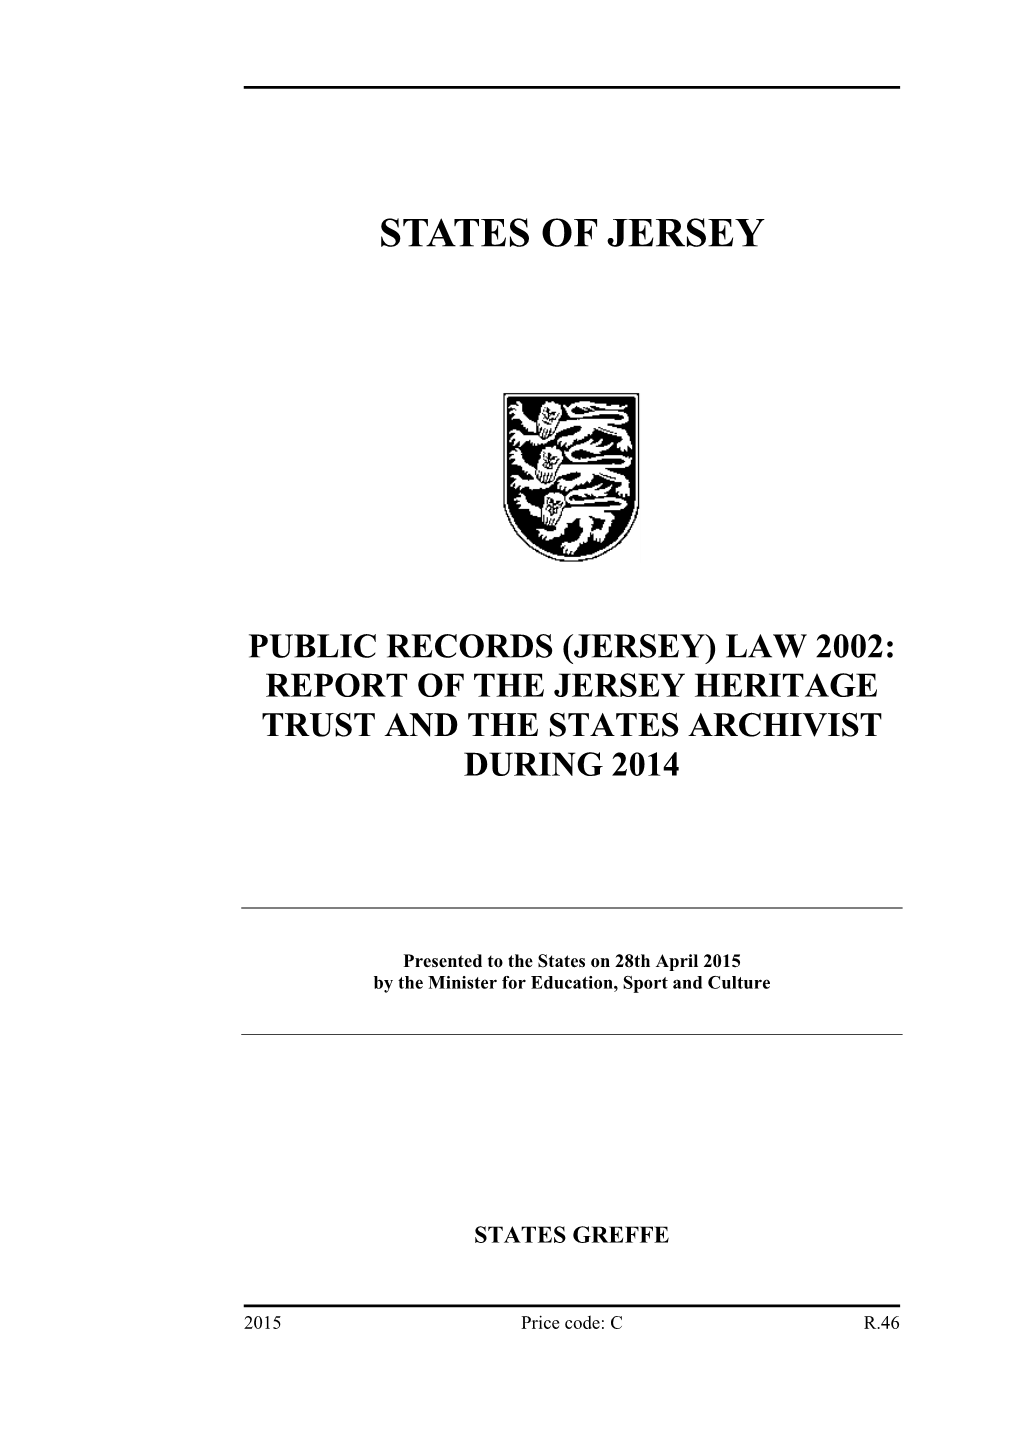 Jersey Heritage Trust and the States Archivist During 2014